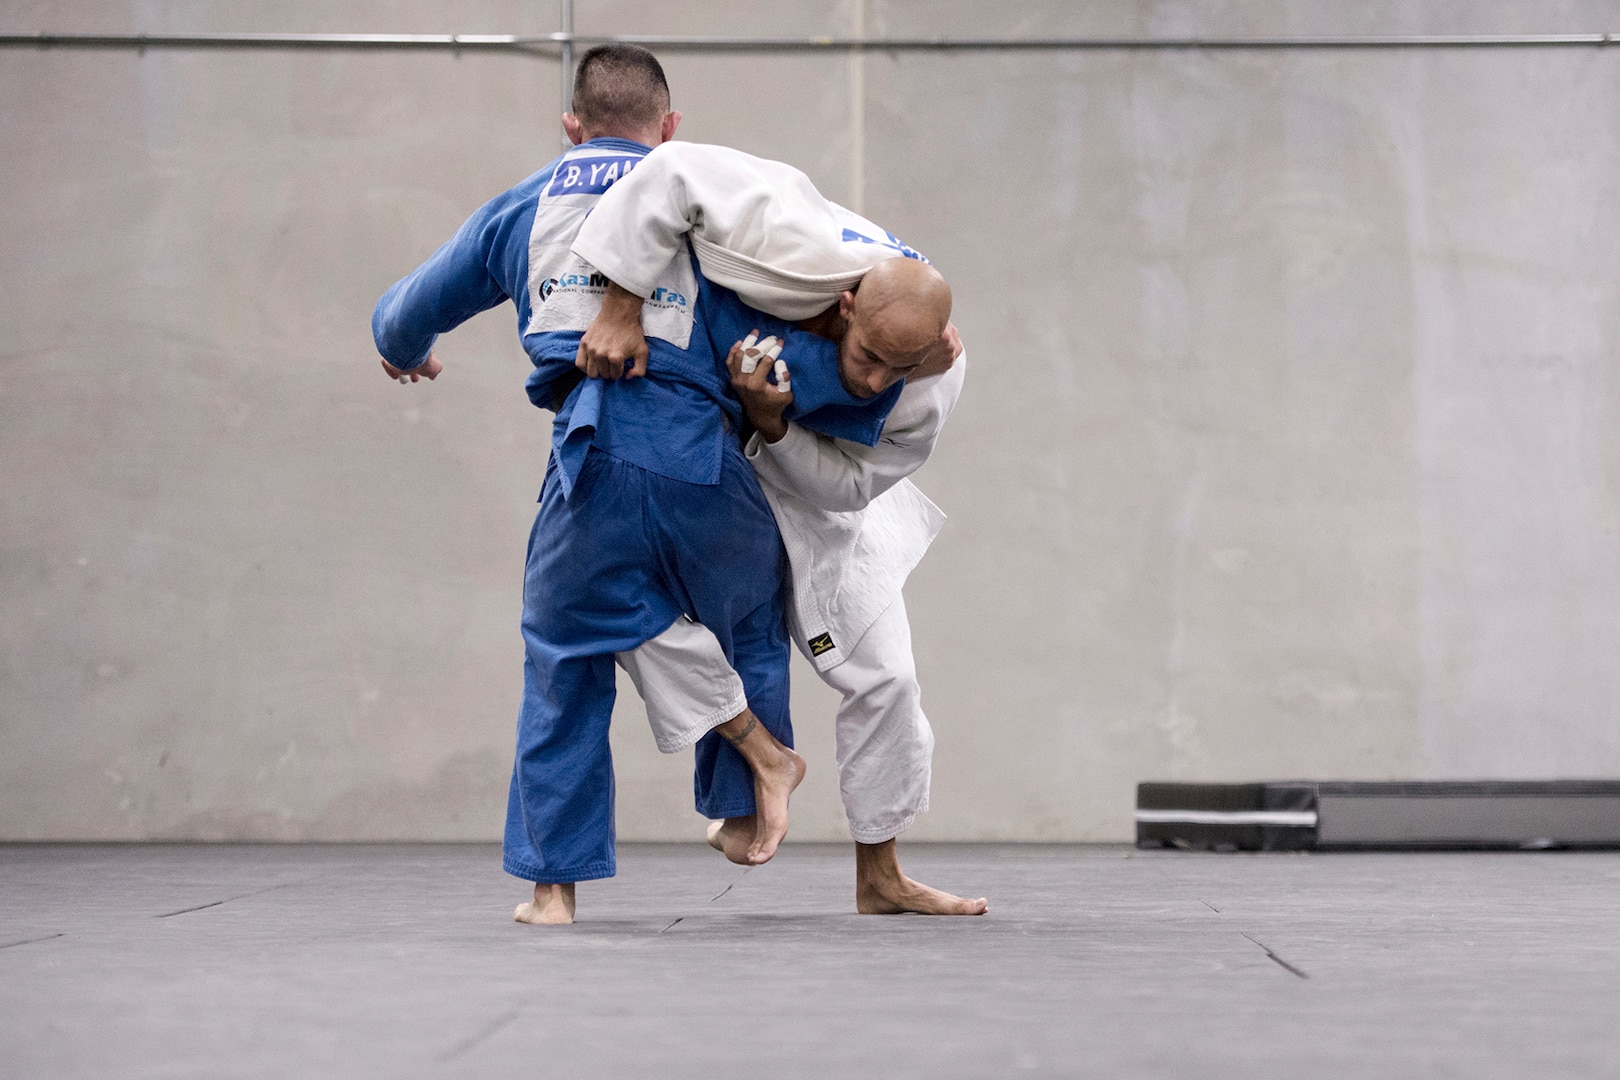 Navy Petty Officer 2nd Class Bobby Yamashita, left and Navy Petty Officer 1st Class Robert Turquest spar during U.S. Armed Forces Judo Team practice at Fort Indiantown Gap, Pa., Sept. 21, 2015. The team is training for the 2015 Military World Games in Mungyeong, South Korea, scheduled for Oct. 2 through Oct. 11. (DoD News photo by EJ Hersom)